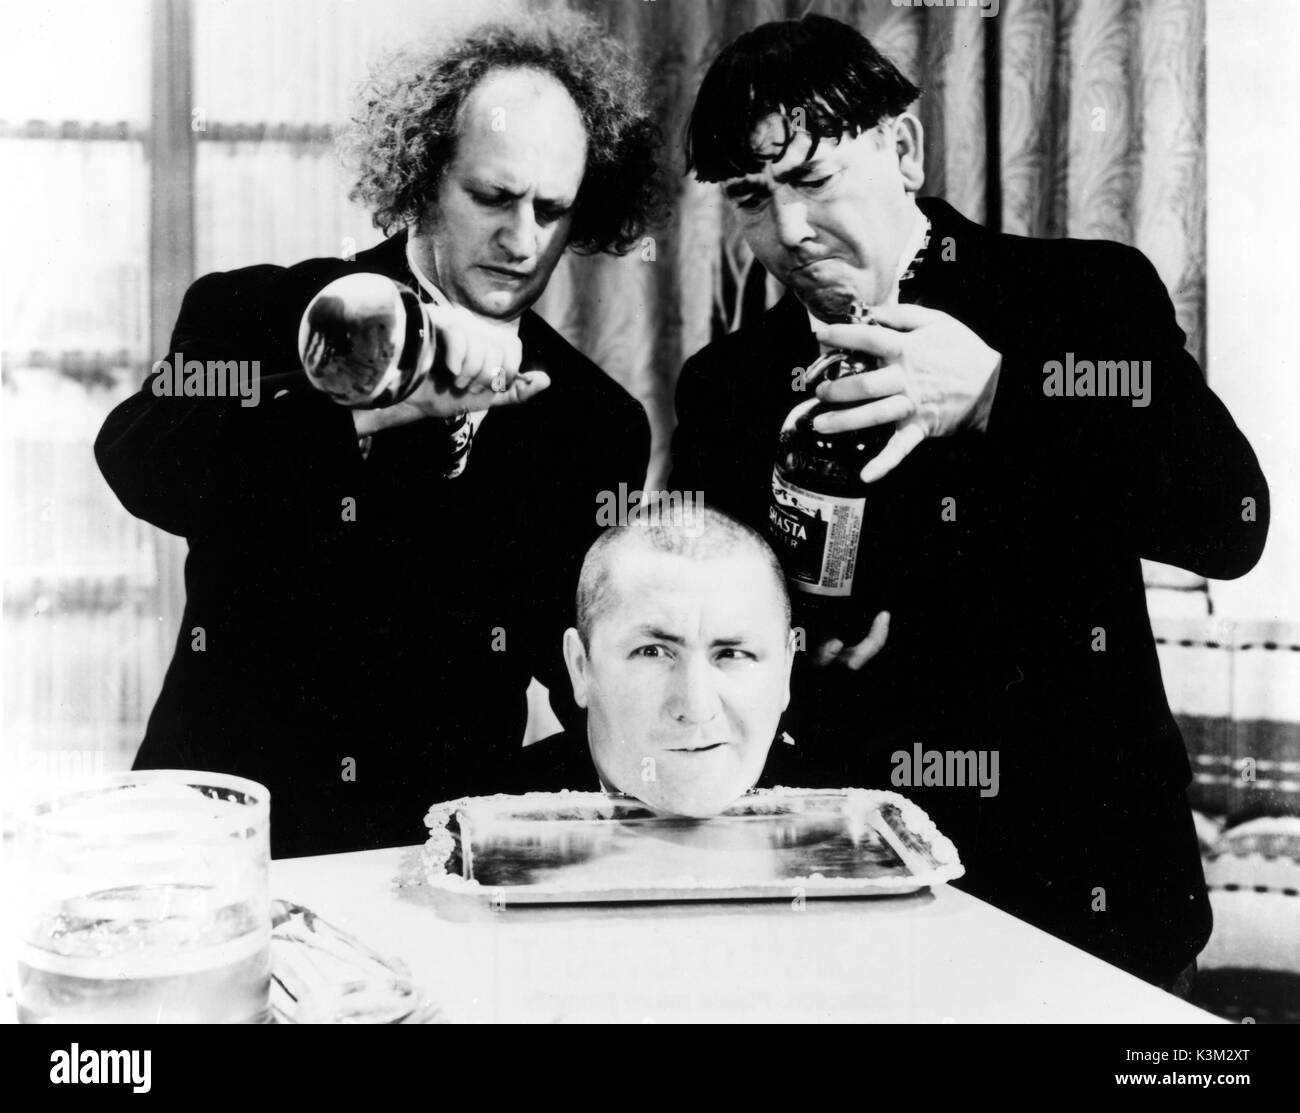 THE THREE STOOGES LARRY FINE, CURLY HOWARD, MOE HOWARD American vaudeville and screen comedy act in the early to mid C20th THE THREE STOOGES Stock Photo